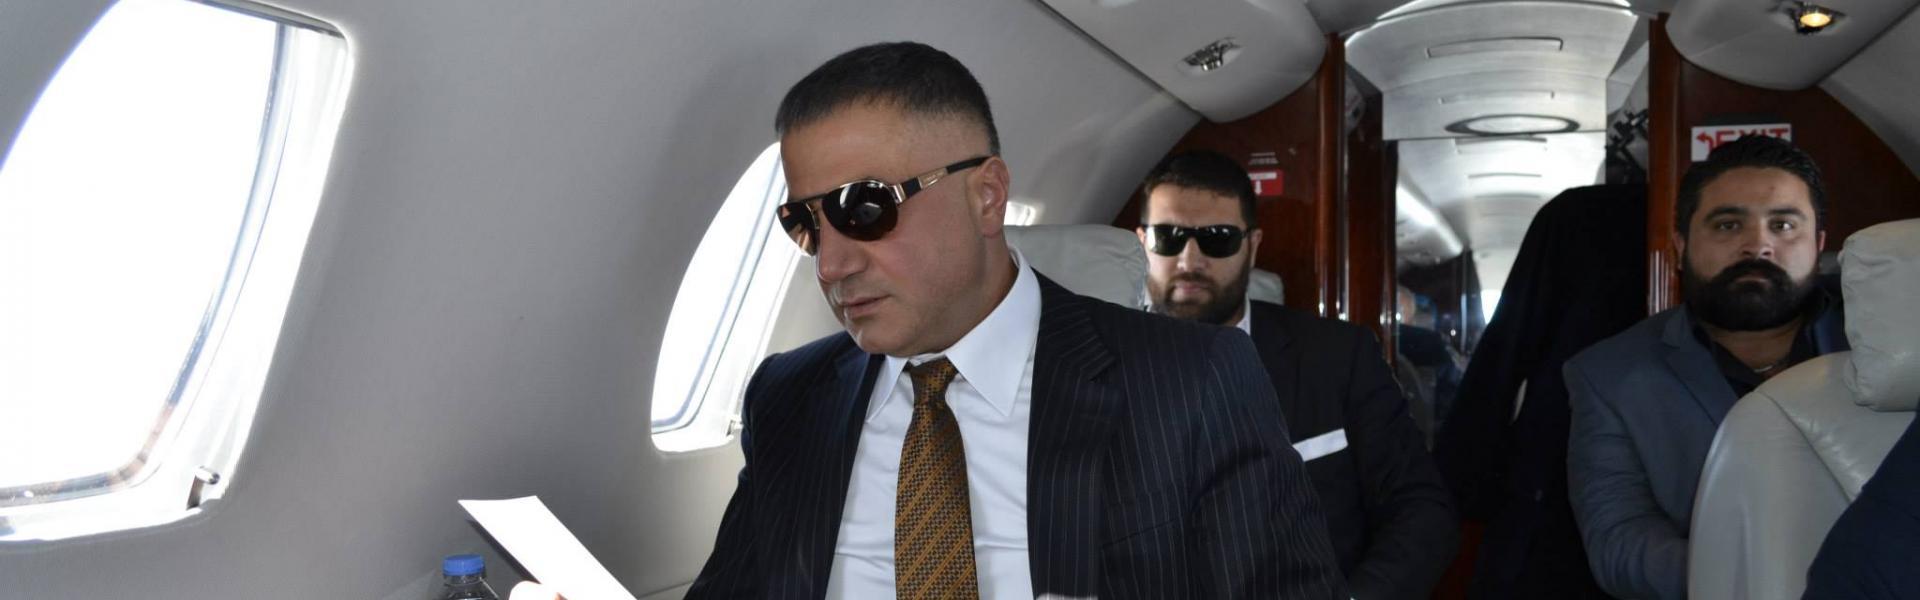 Crime boss’s YouTube revelations rattle AKP government 1